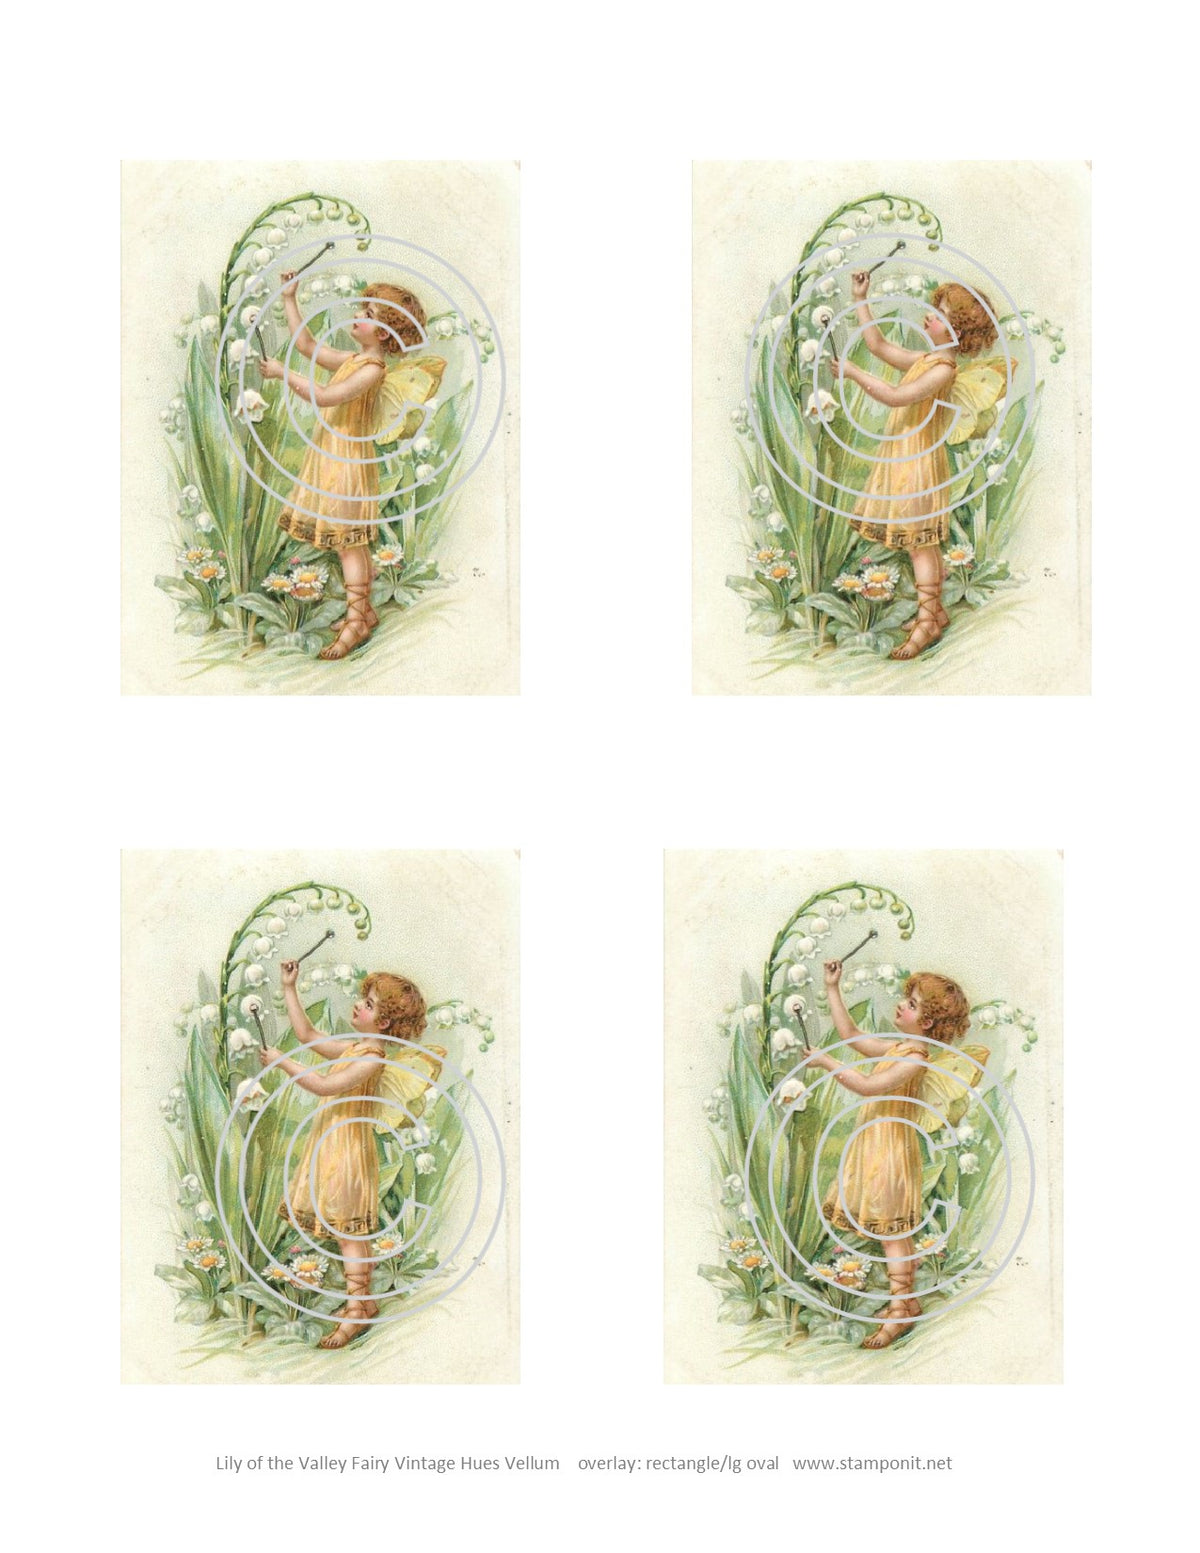 Vintage Hues Vellum Lily of the Valley Fairy